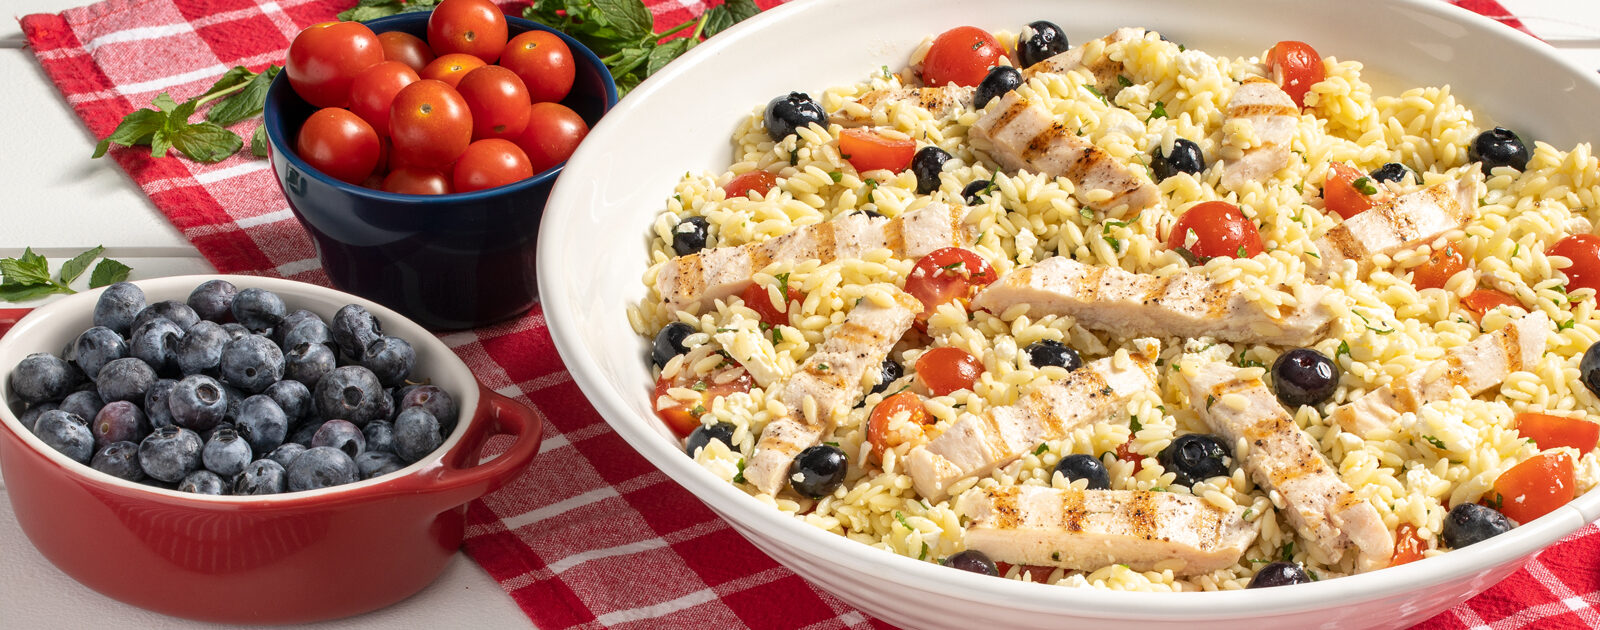 Red, White & Blue Orzo Grilled Chicken Salad